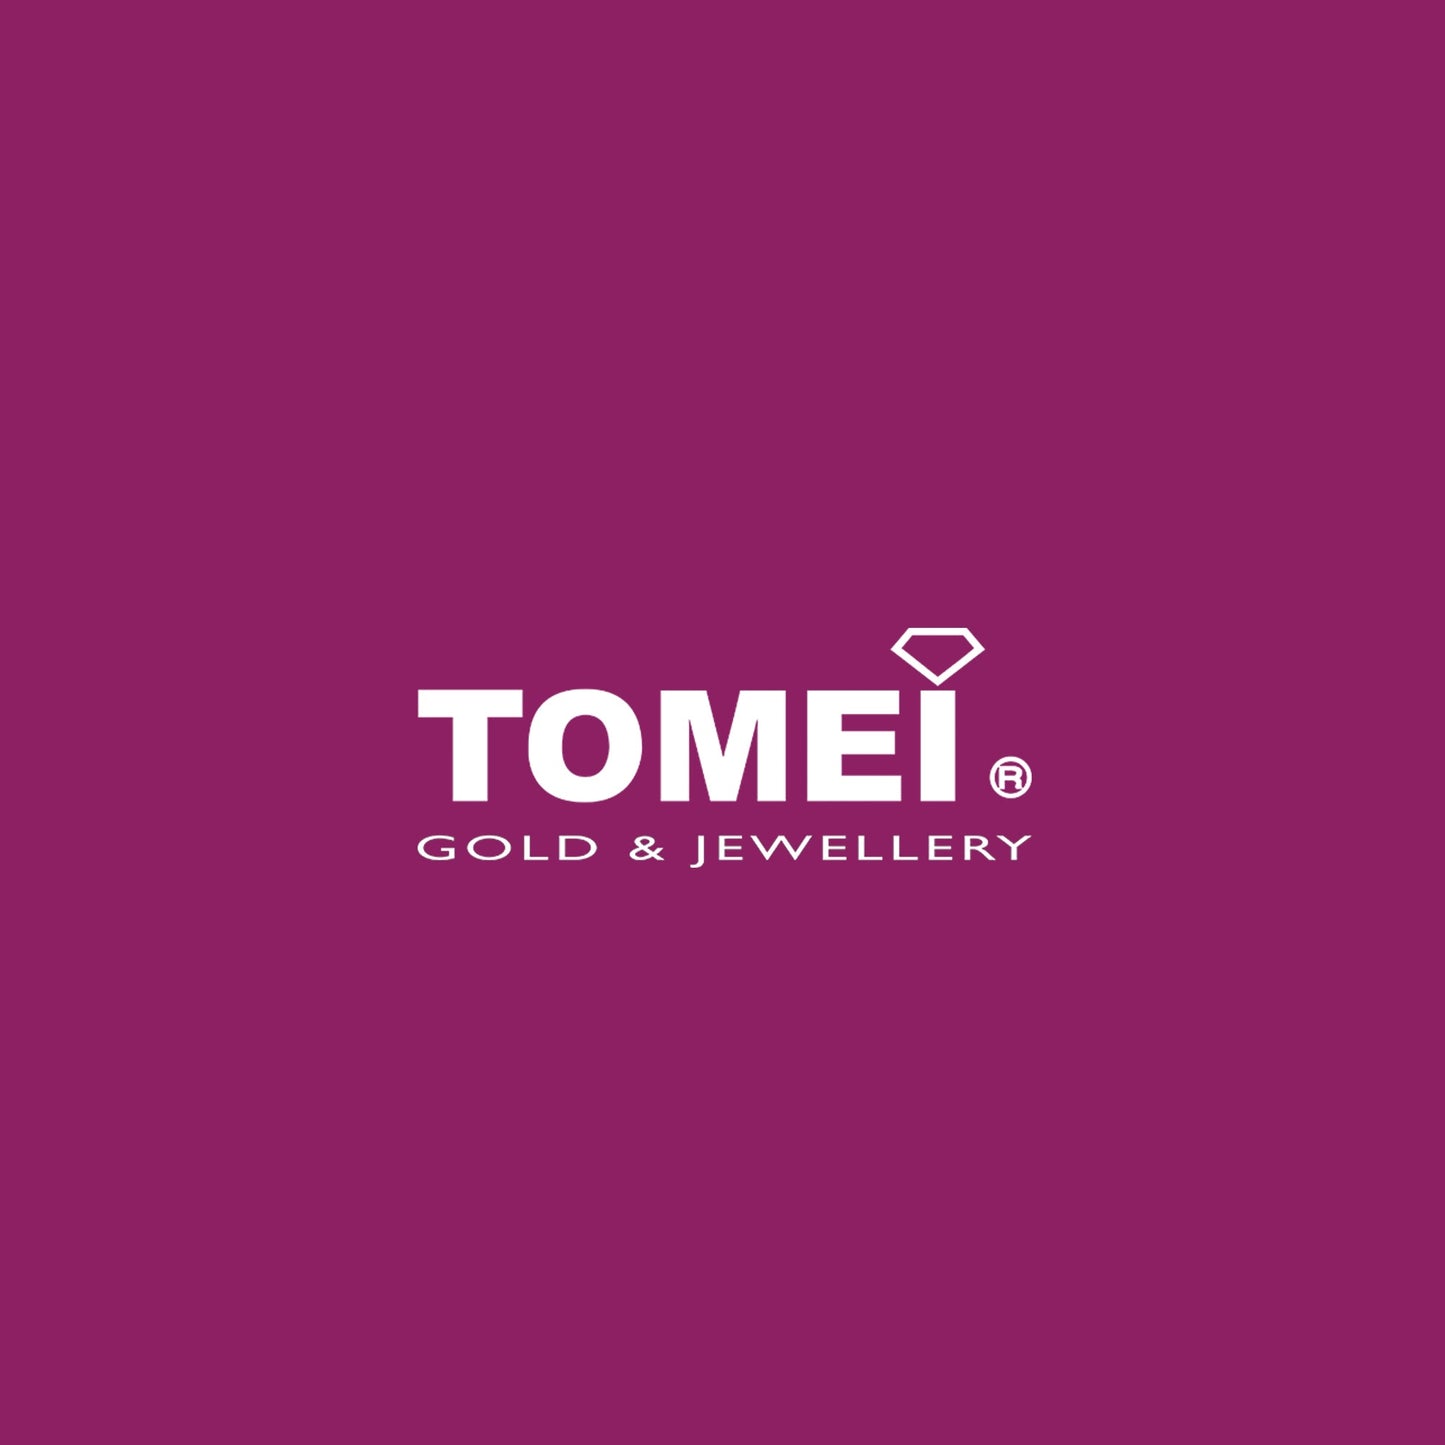 TOMEI Sweet Blessings Rooster Pendant, Yellow Gold 916